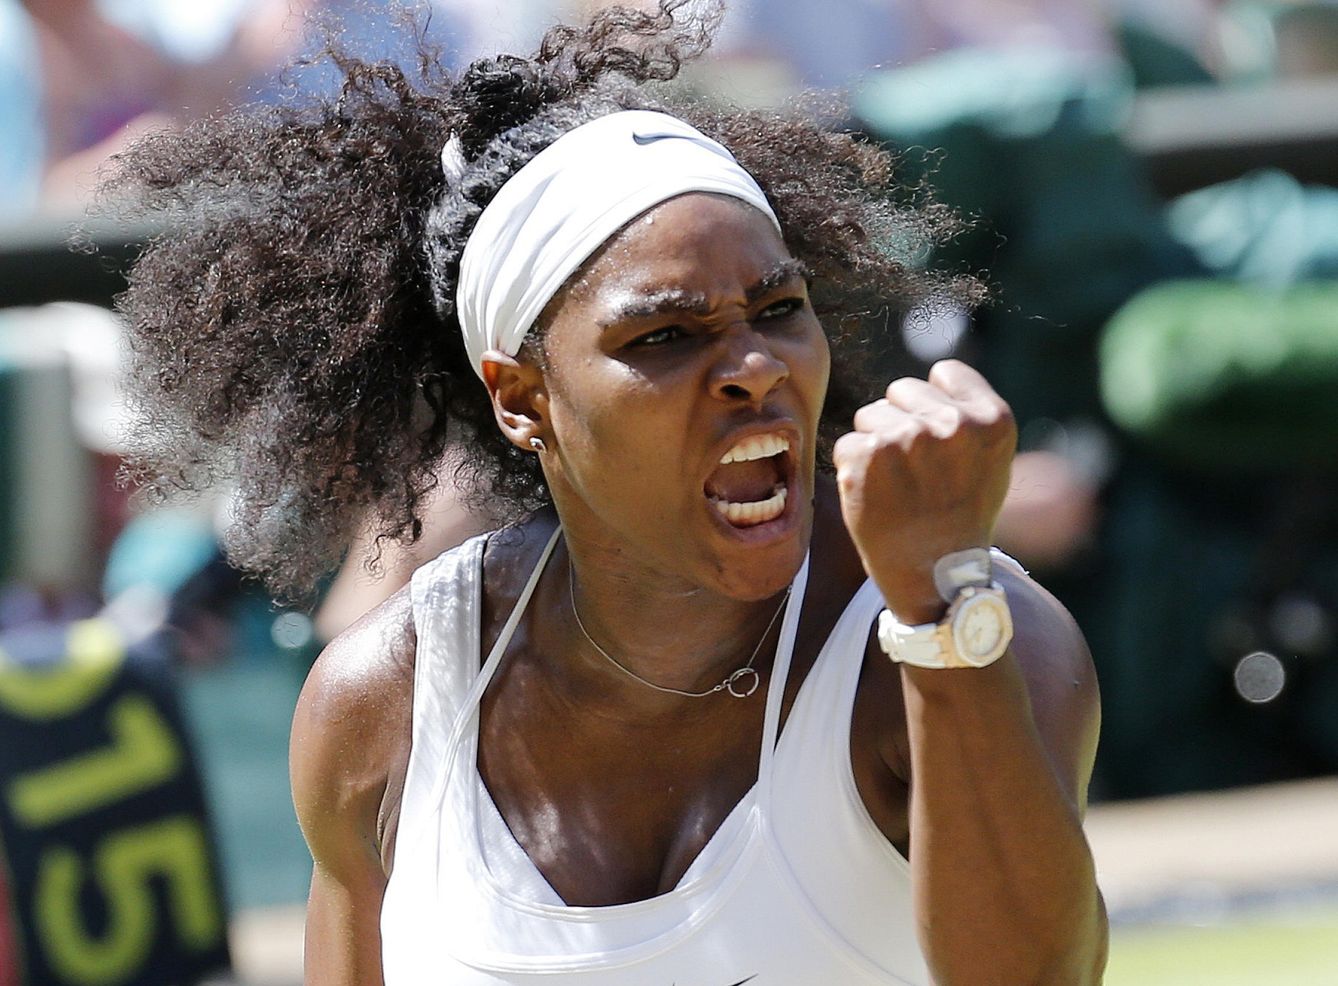 Serena williams of the u.s.a reacts after winning the first set of her women's final match against garbine muguruza of spain at the wimbledon tennis championships in london